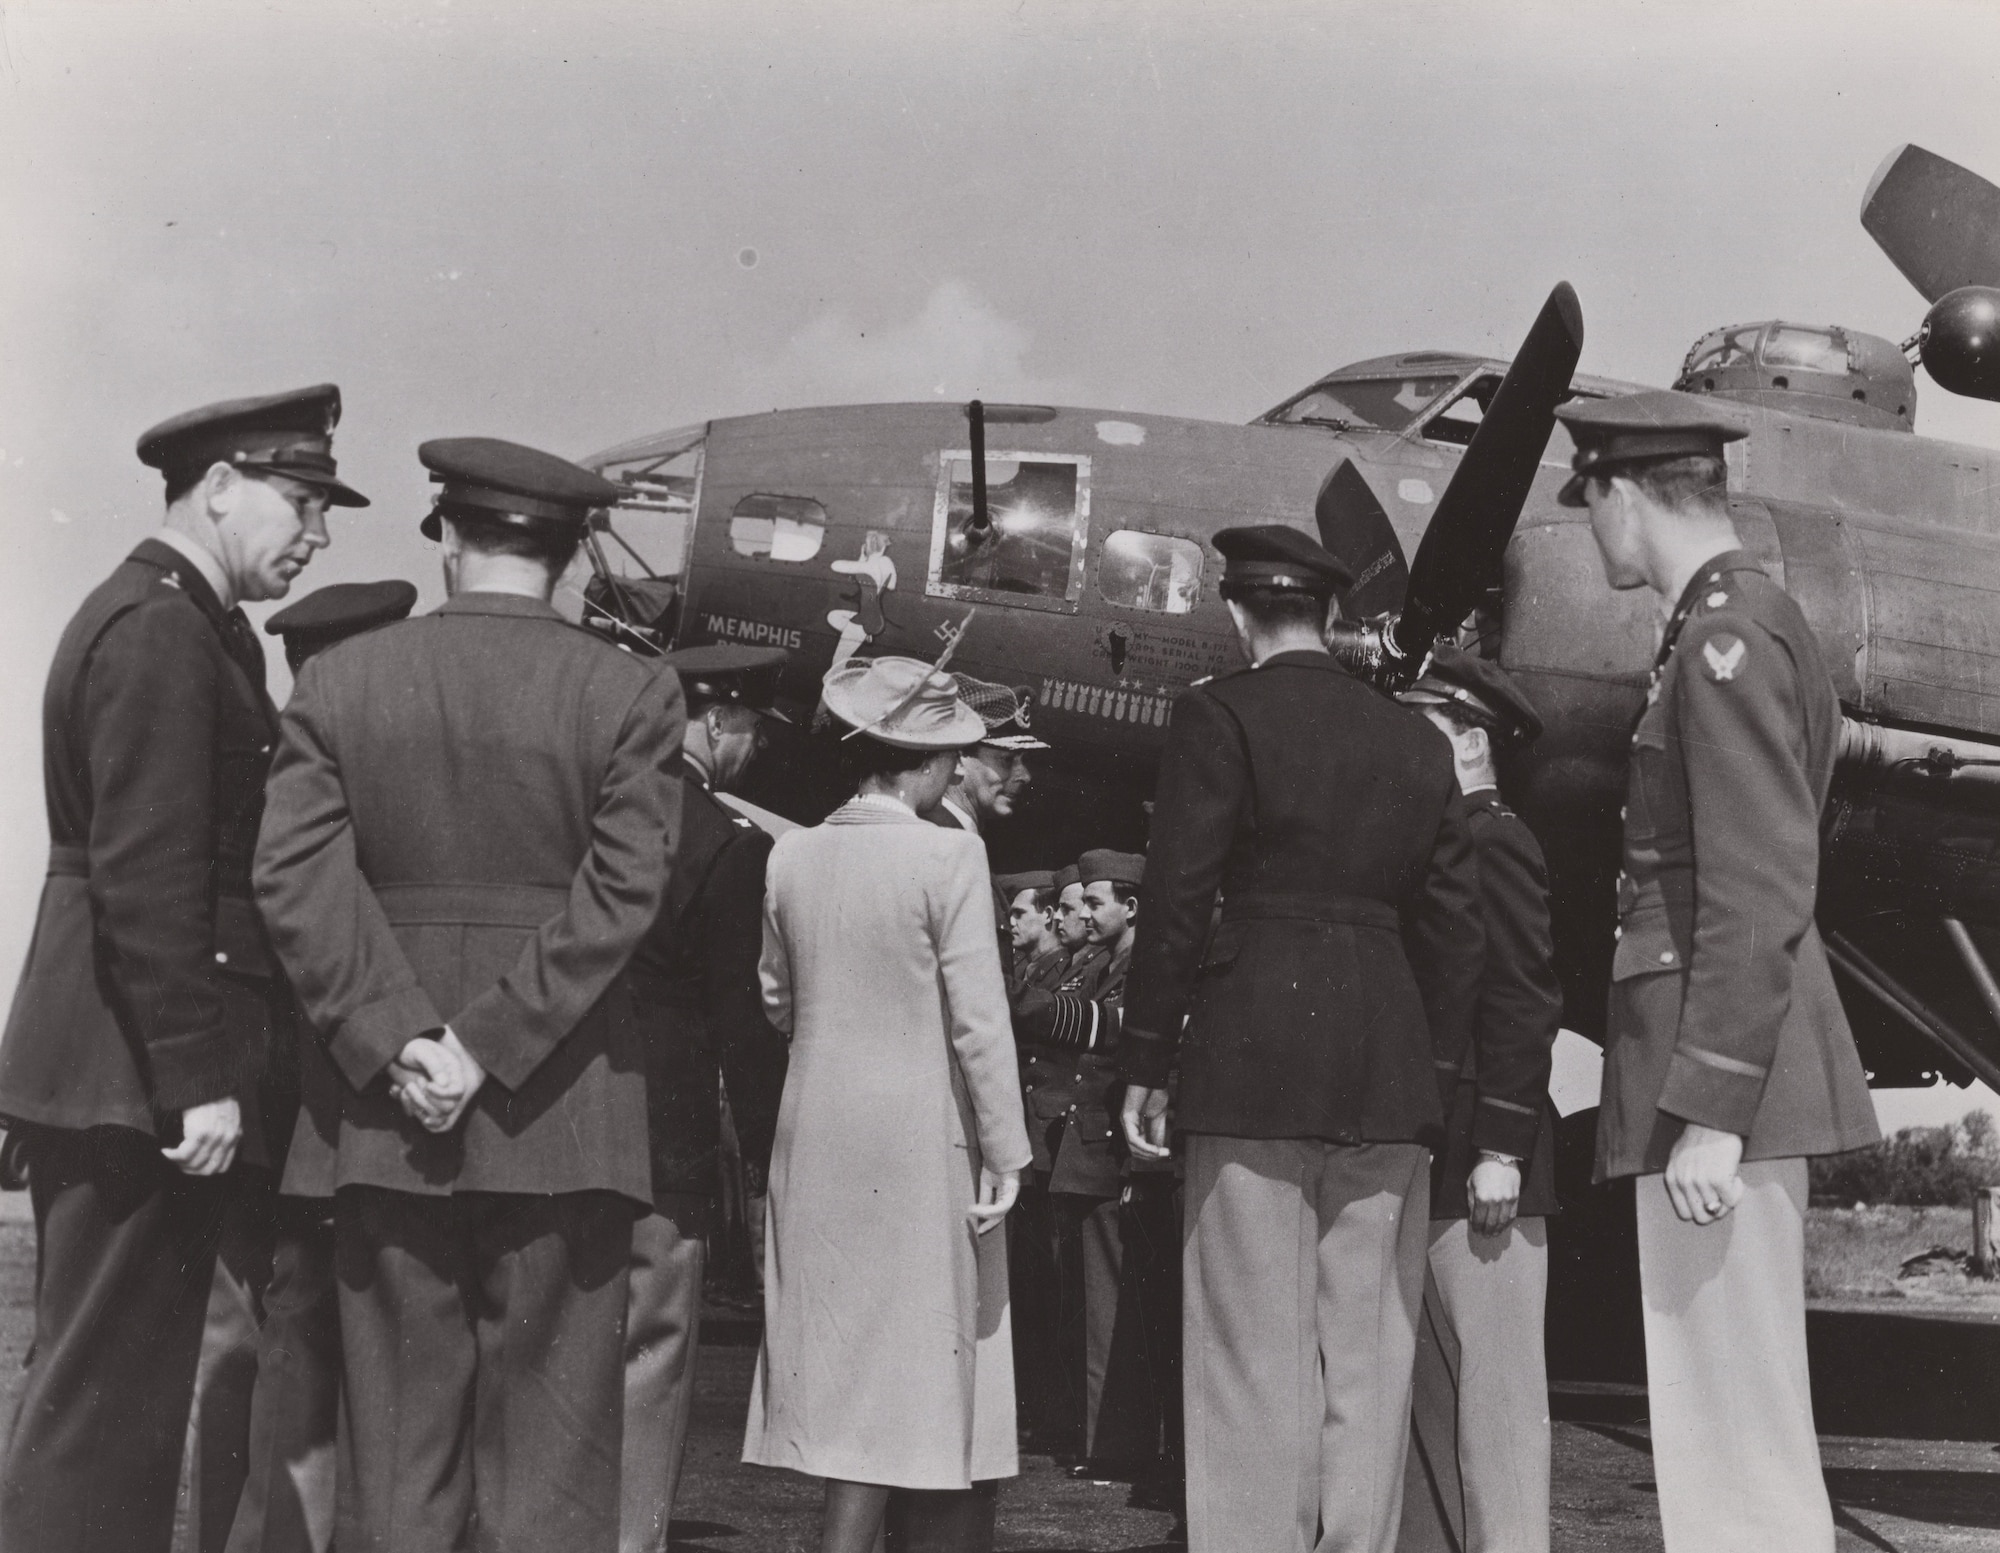 On May 26, 1943, King George VI and Queen Elizabeth visited the Memphis Belle crew at Bassingbourn after they finished their tour.